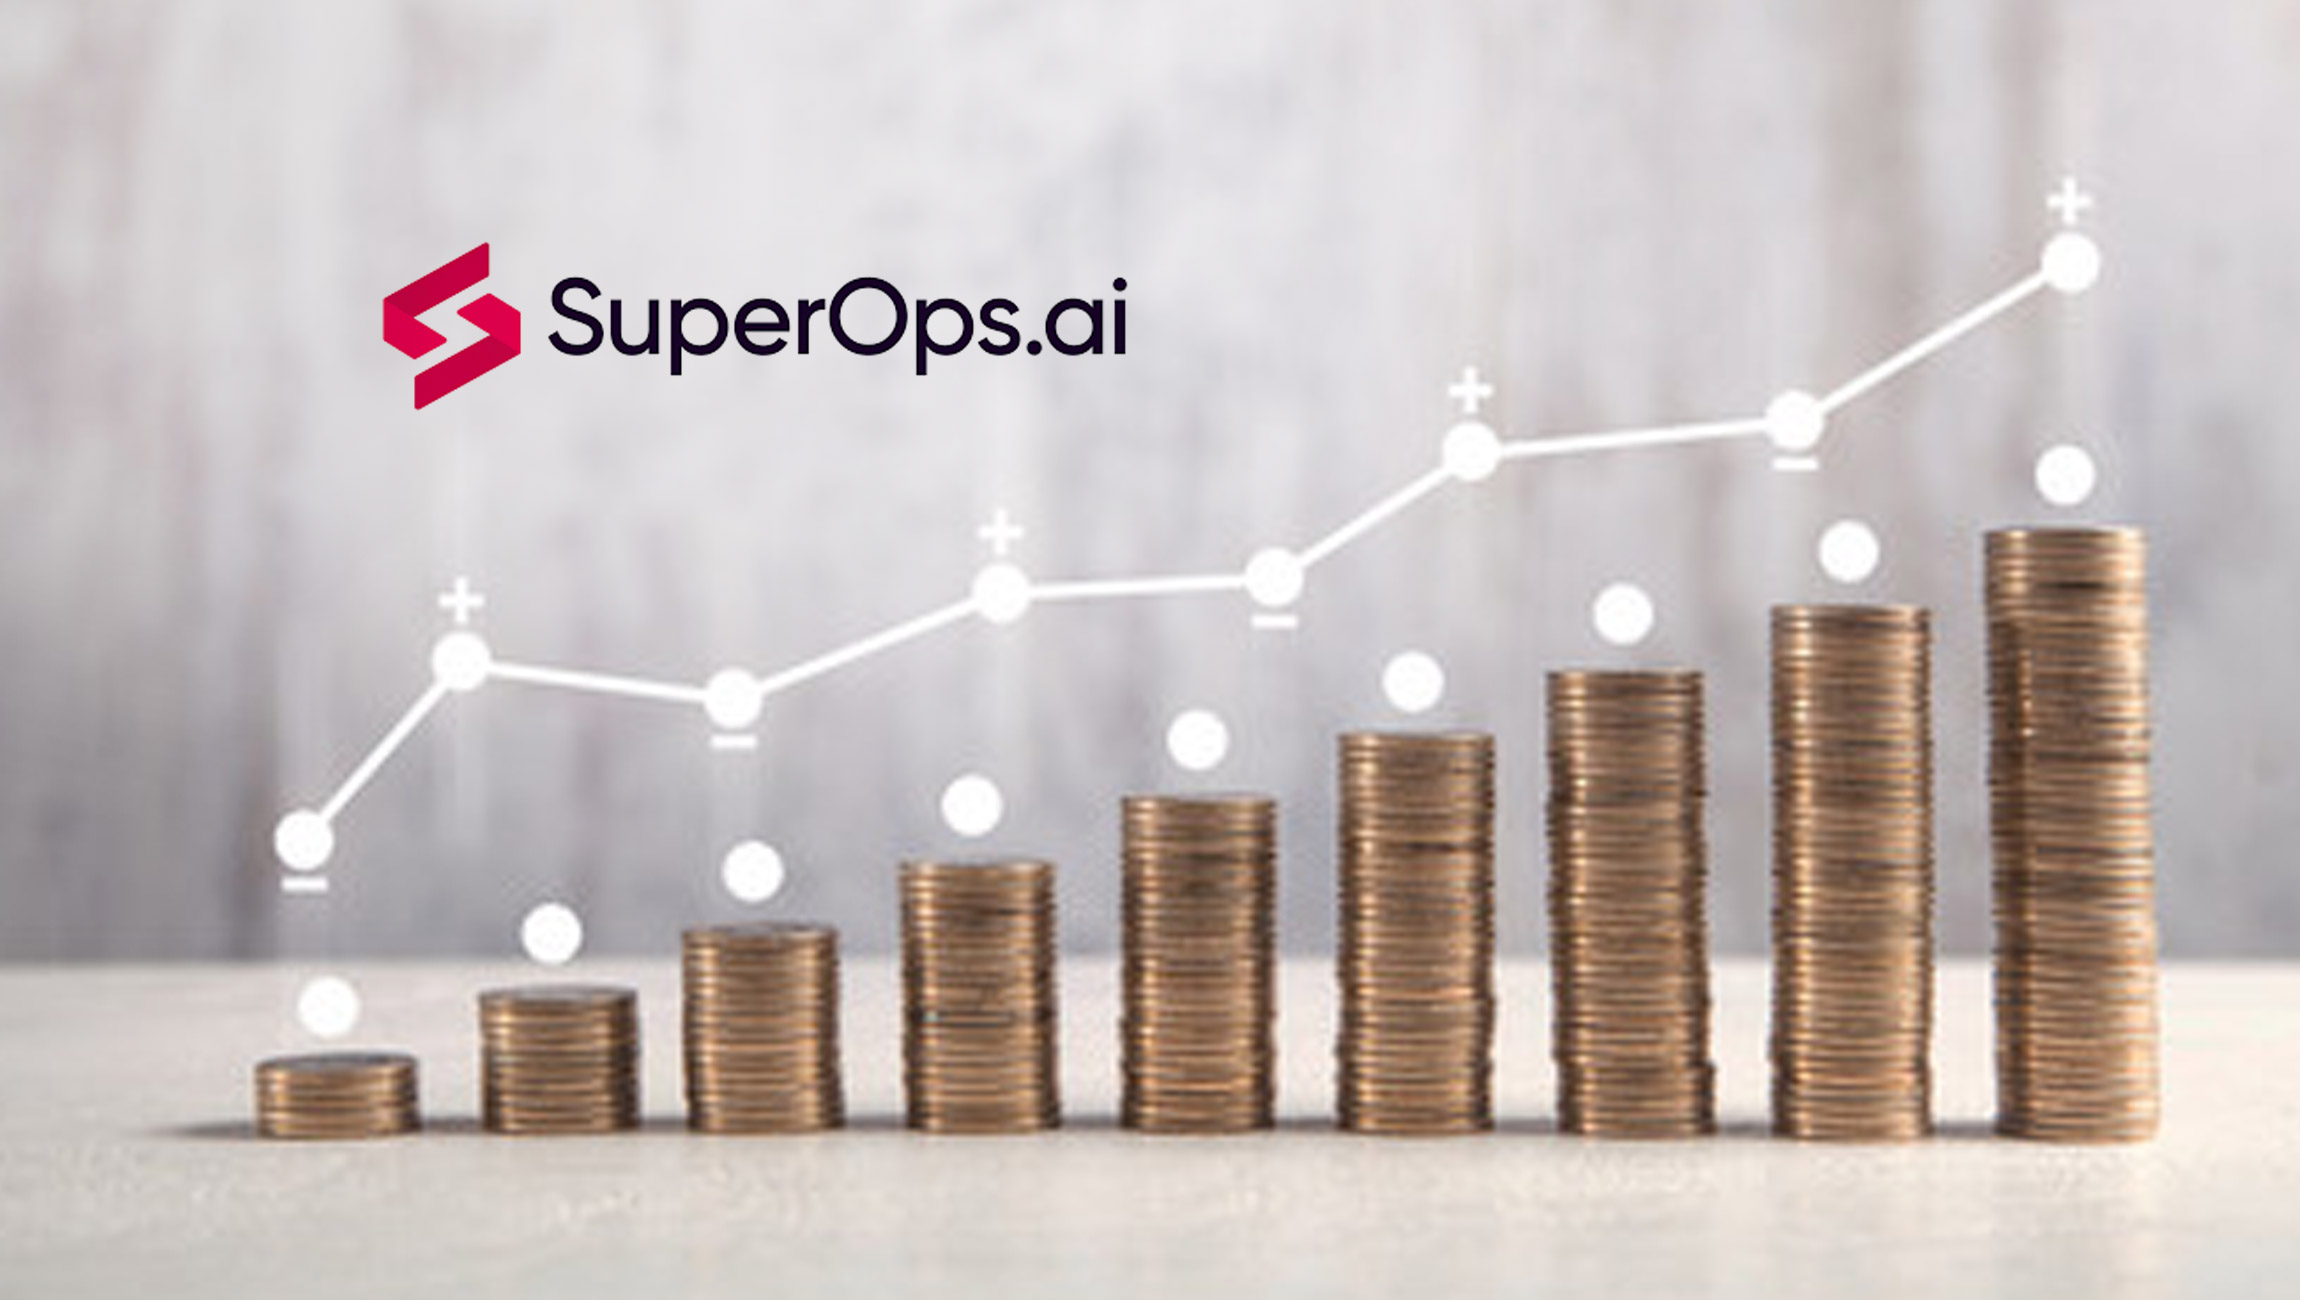 SuperOps.ai Raises $14m funding round as it boosts the Managed Service Providers industry